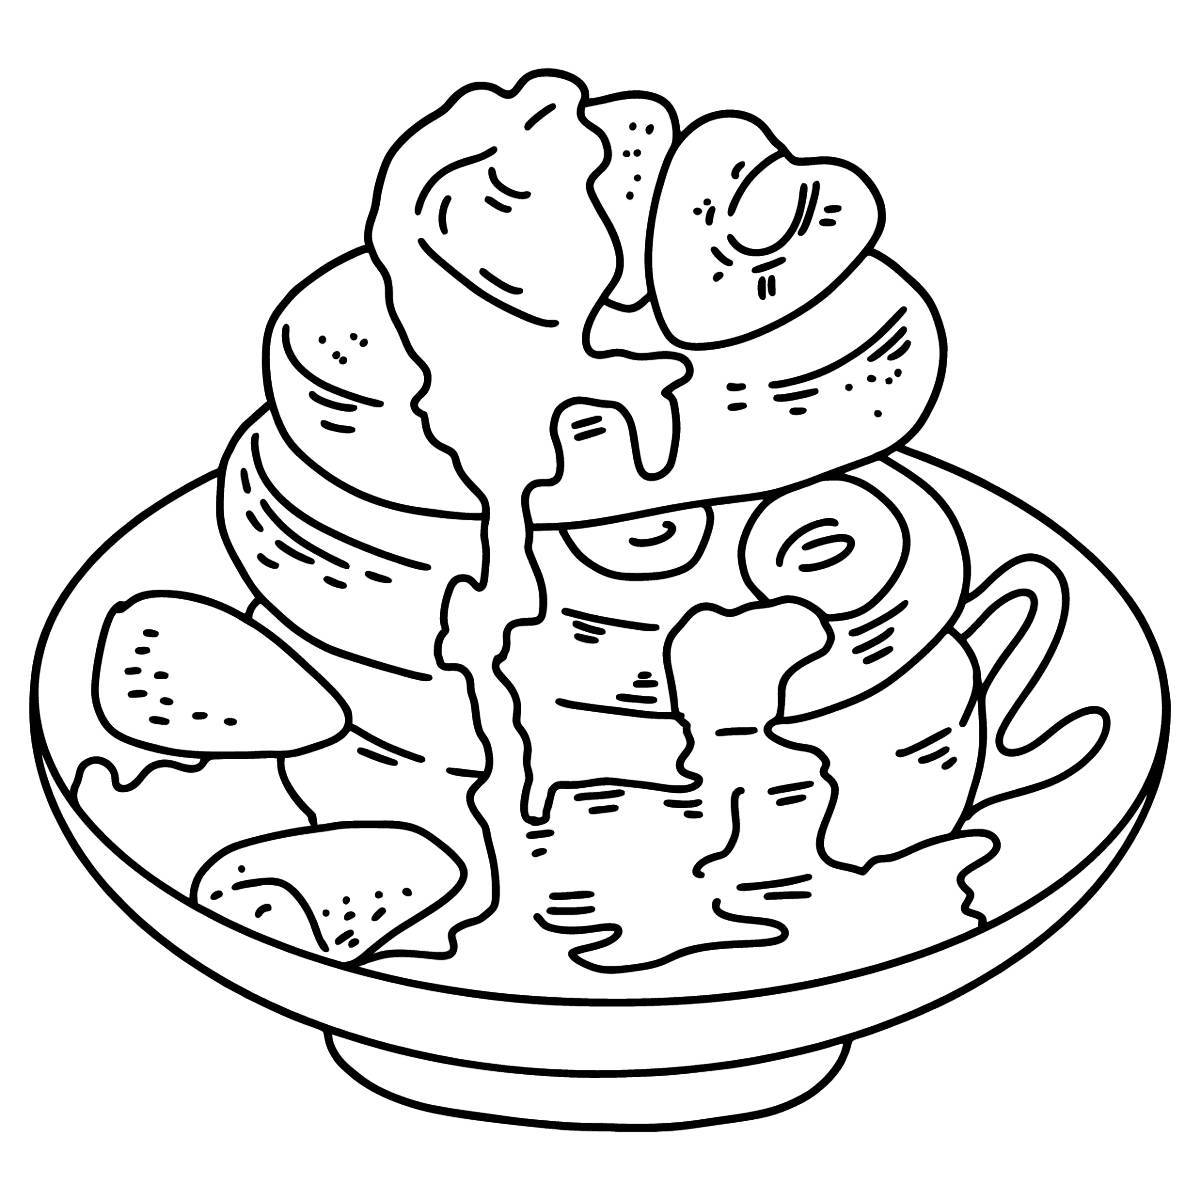 Fluffy pancake coloring page